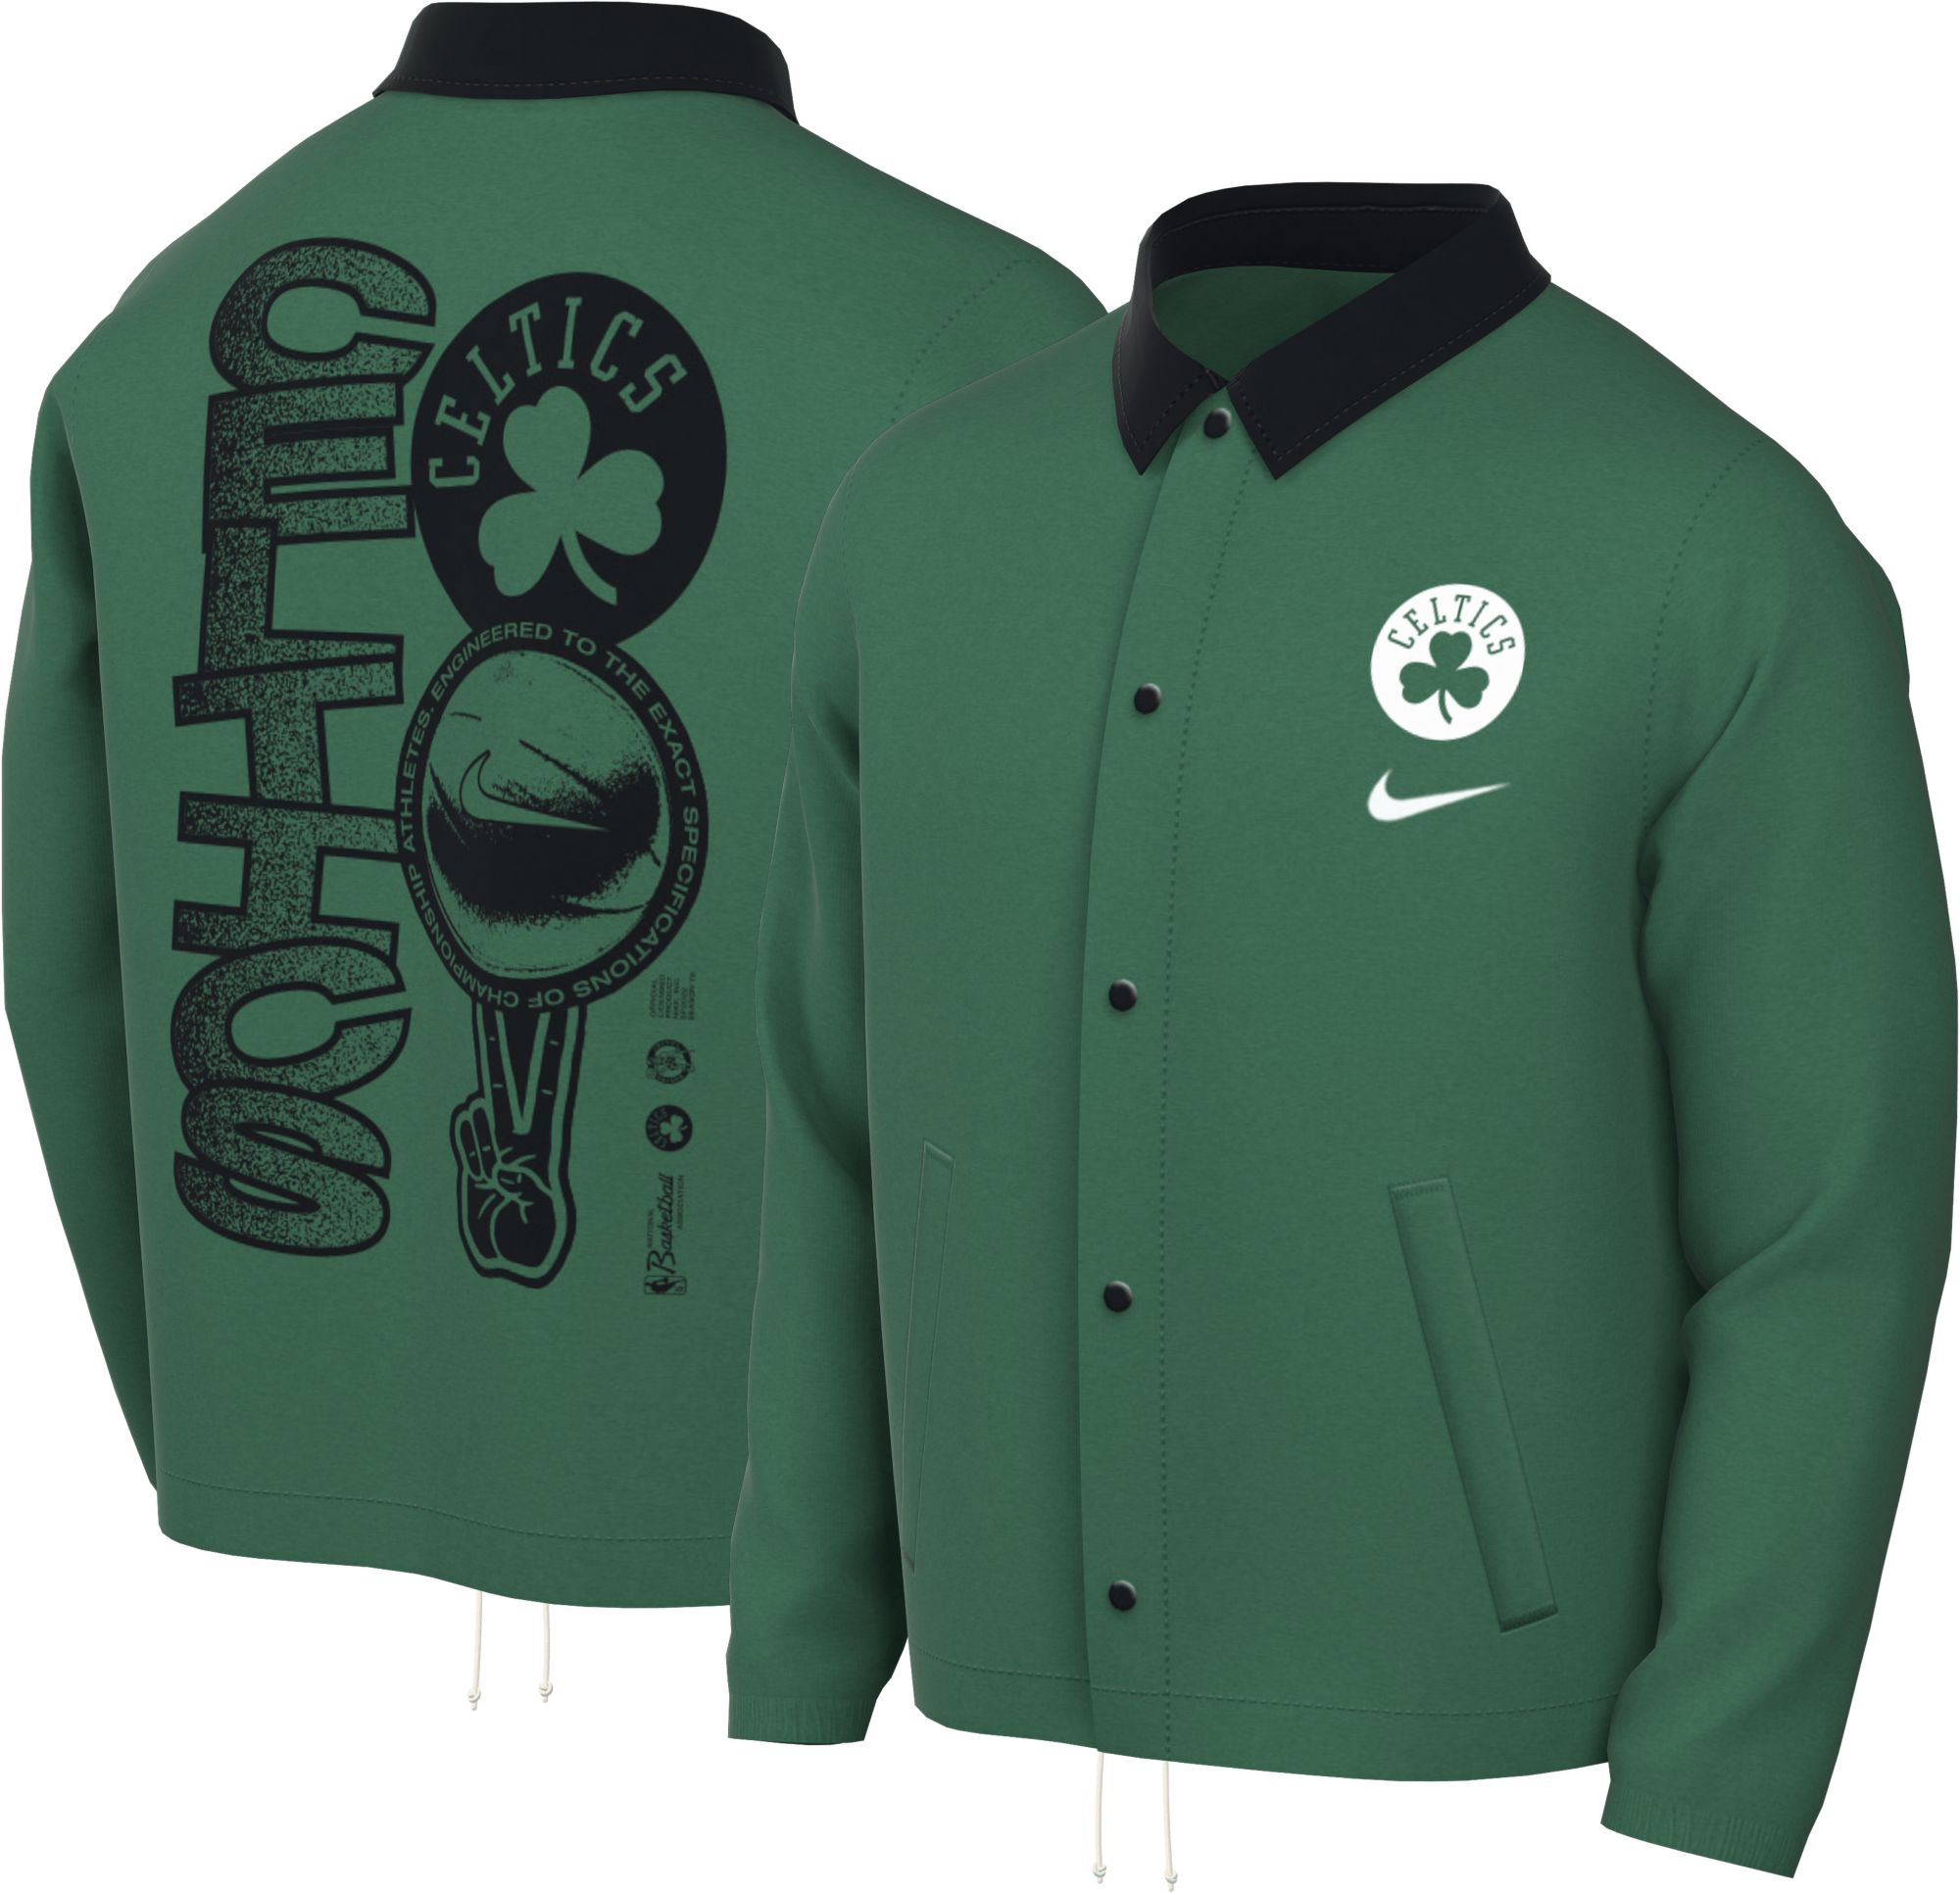 Boston Celtics Apparel & Gear  Curbside Pickup Available at DICK'S